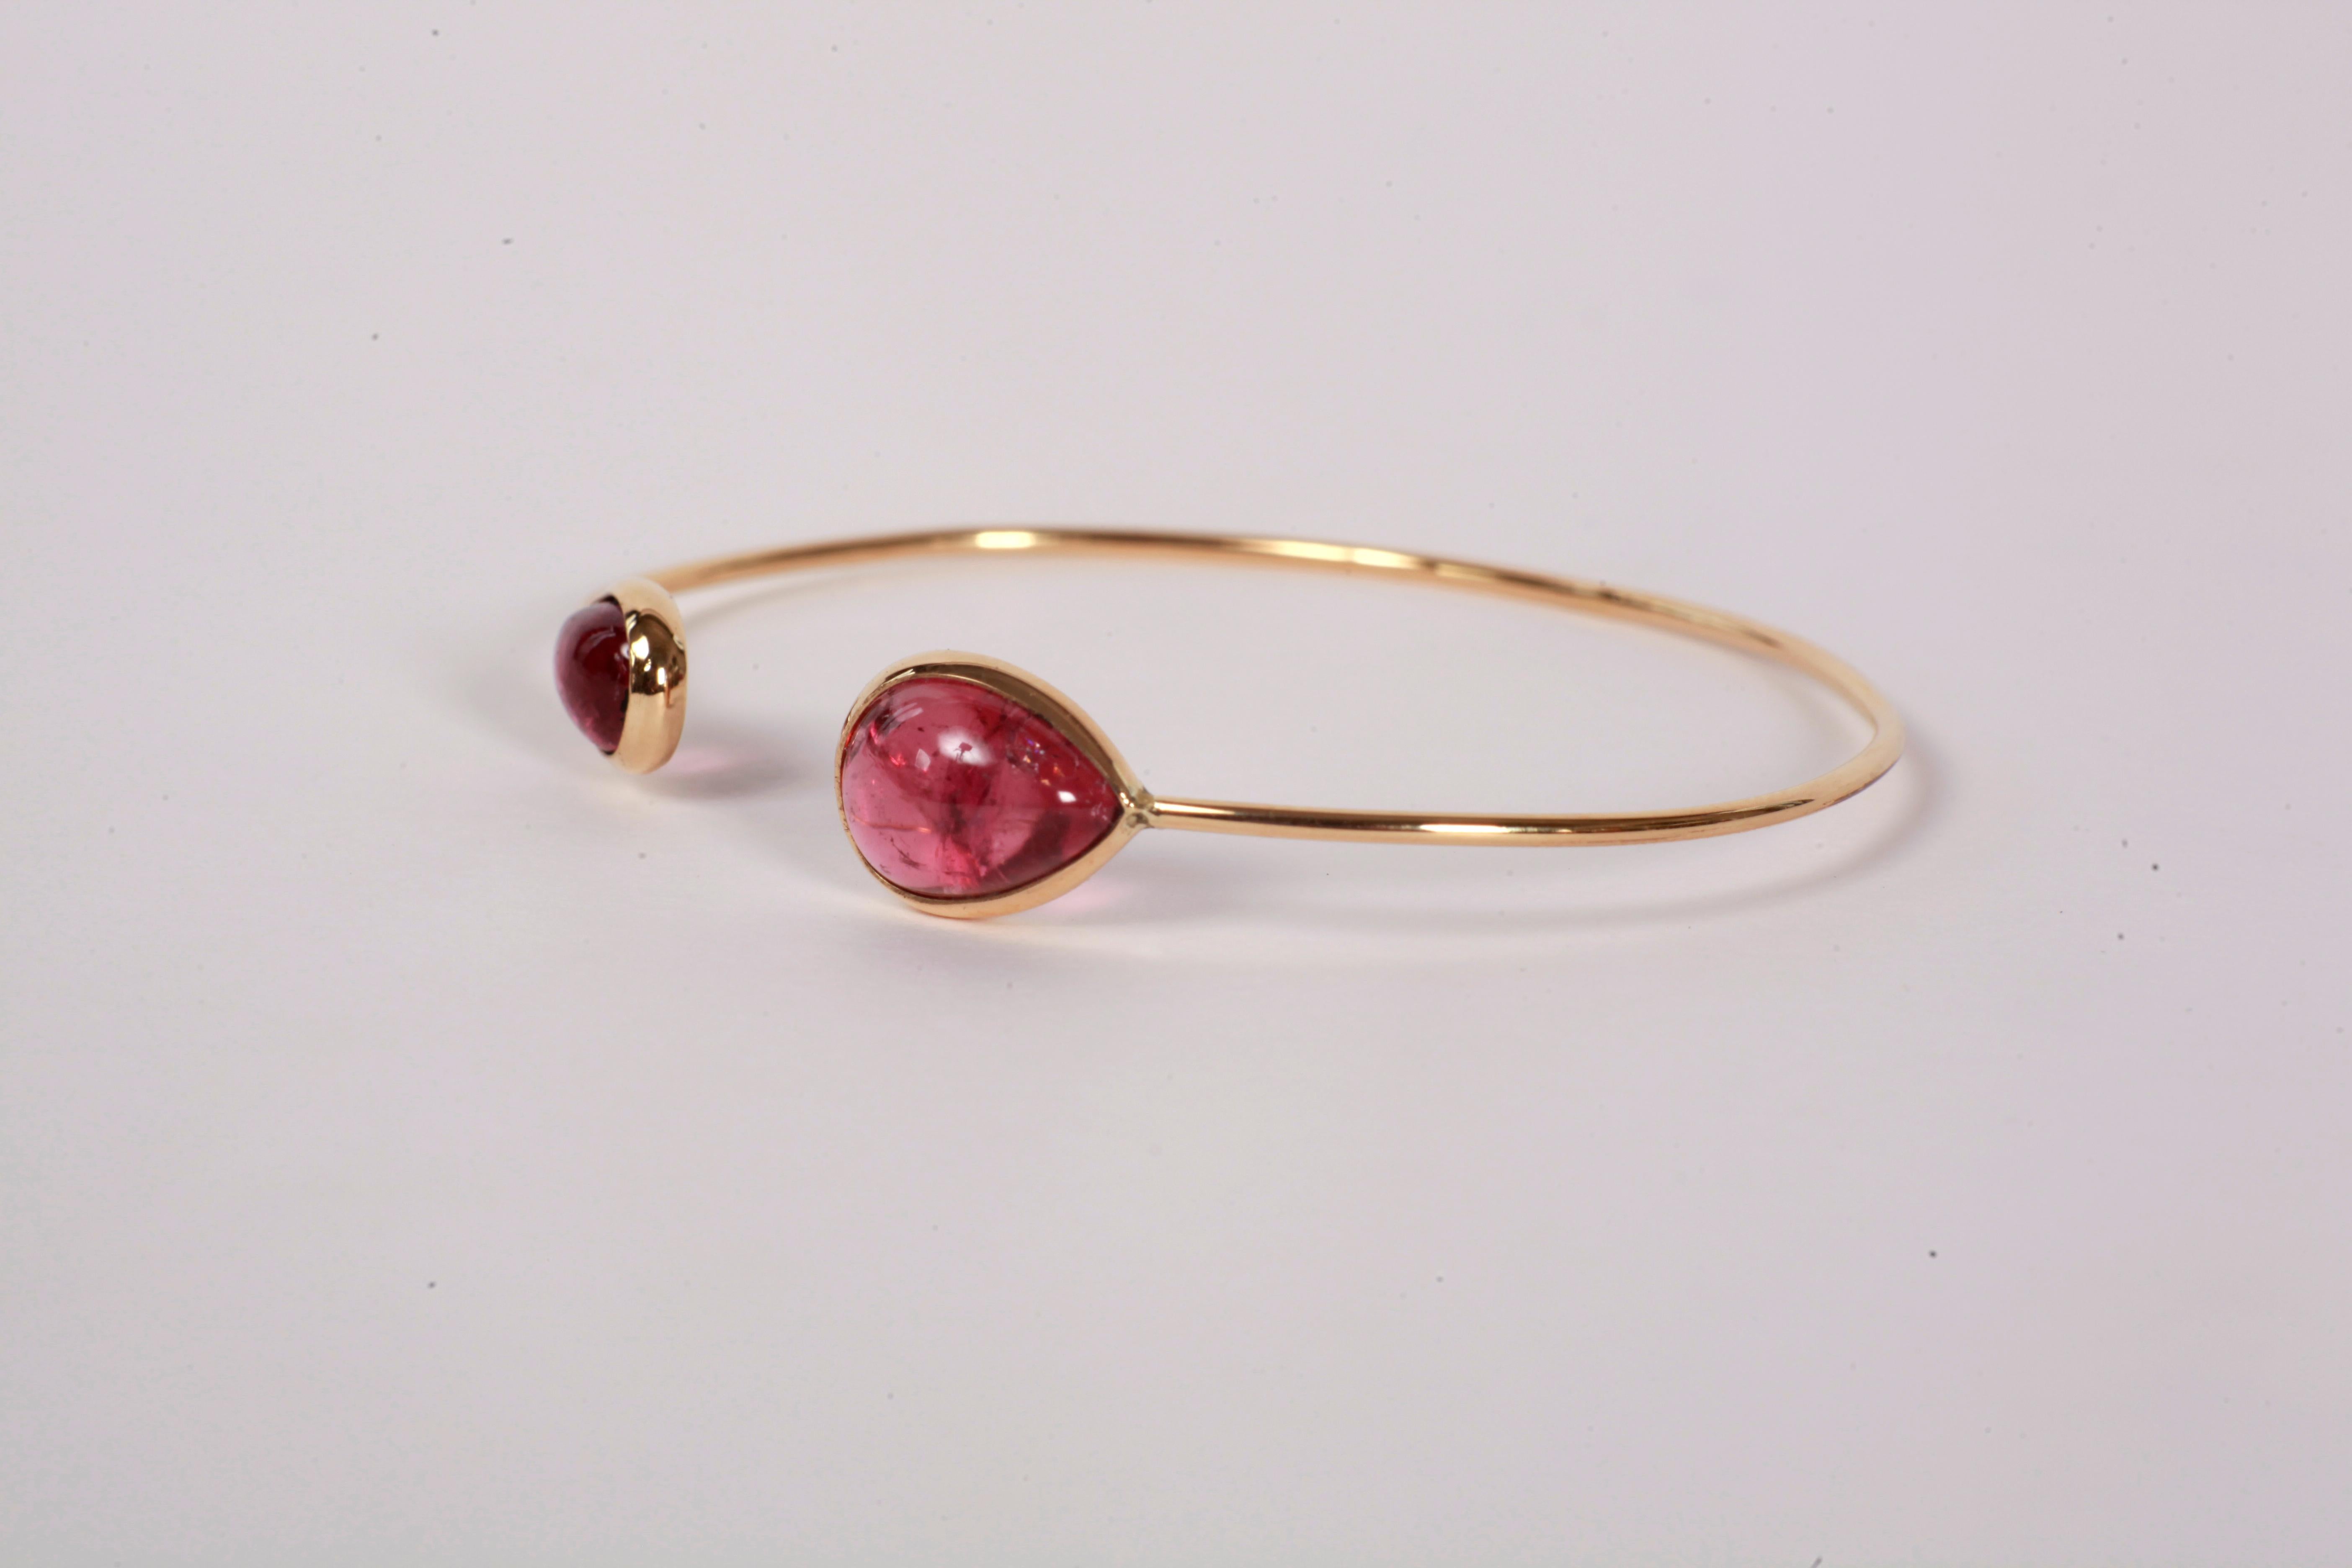 Pear Cut Pink Tourmaline Yellow Gold Bangle Bracelet Created by Marion Jeantet